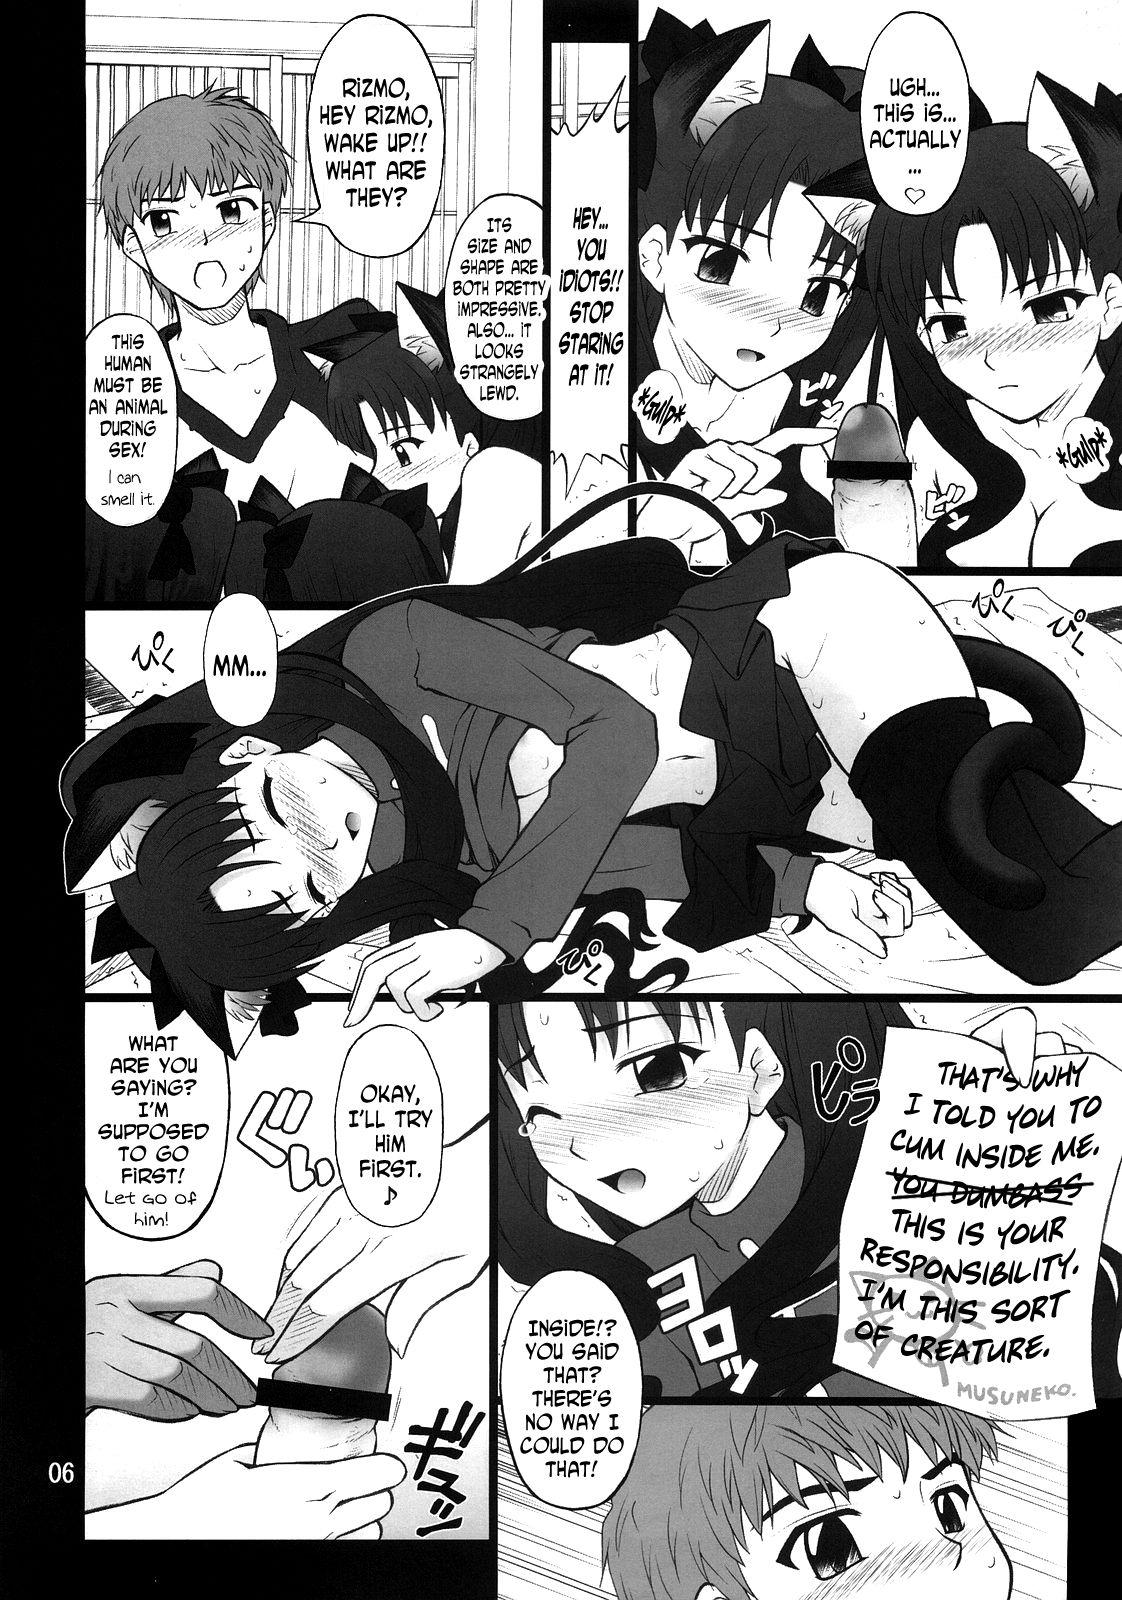 Virgin Grem-Rin 2 - Fate stay night Wetpussy - Page 5